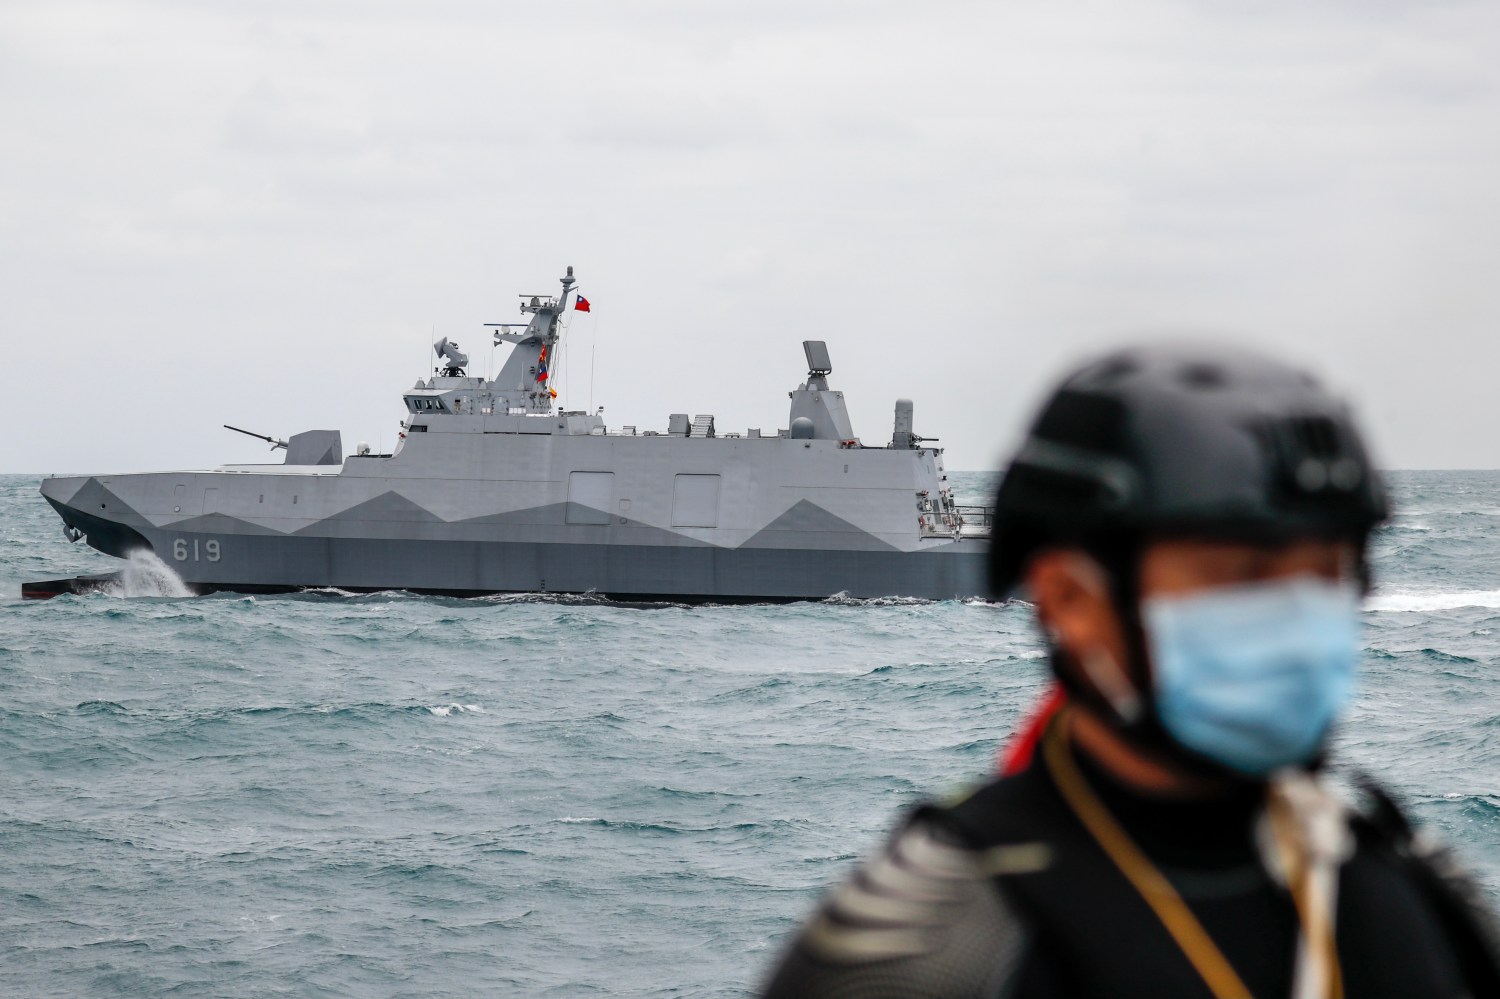 A Taiwanese military corvette sails as a Navy soldier stands guard on a vessel, during a Navy Drill for Preparedness Enhancement ahead of the Chinese New Year, amid escalating Chinese threats to the island, in Keelung, Taiwan, 7 Jan, 2022. With the US approving an increasing number of arms sales to Taipei and China sending more PLA warplanes to cruise around the self governing island, military tensions in the Taiwan Strait have been expected to grow. (Photo by Ceng Shou Yi/NurPhoto)